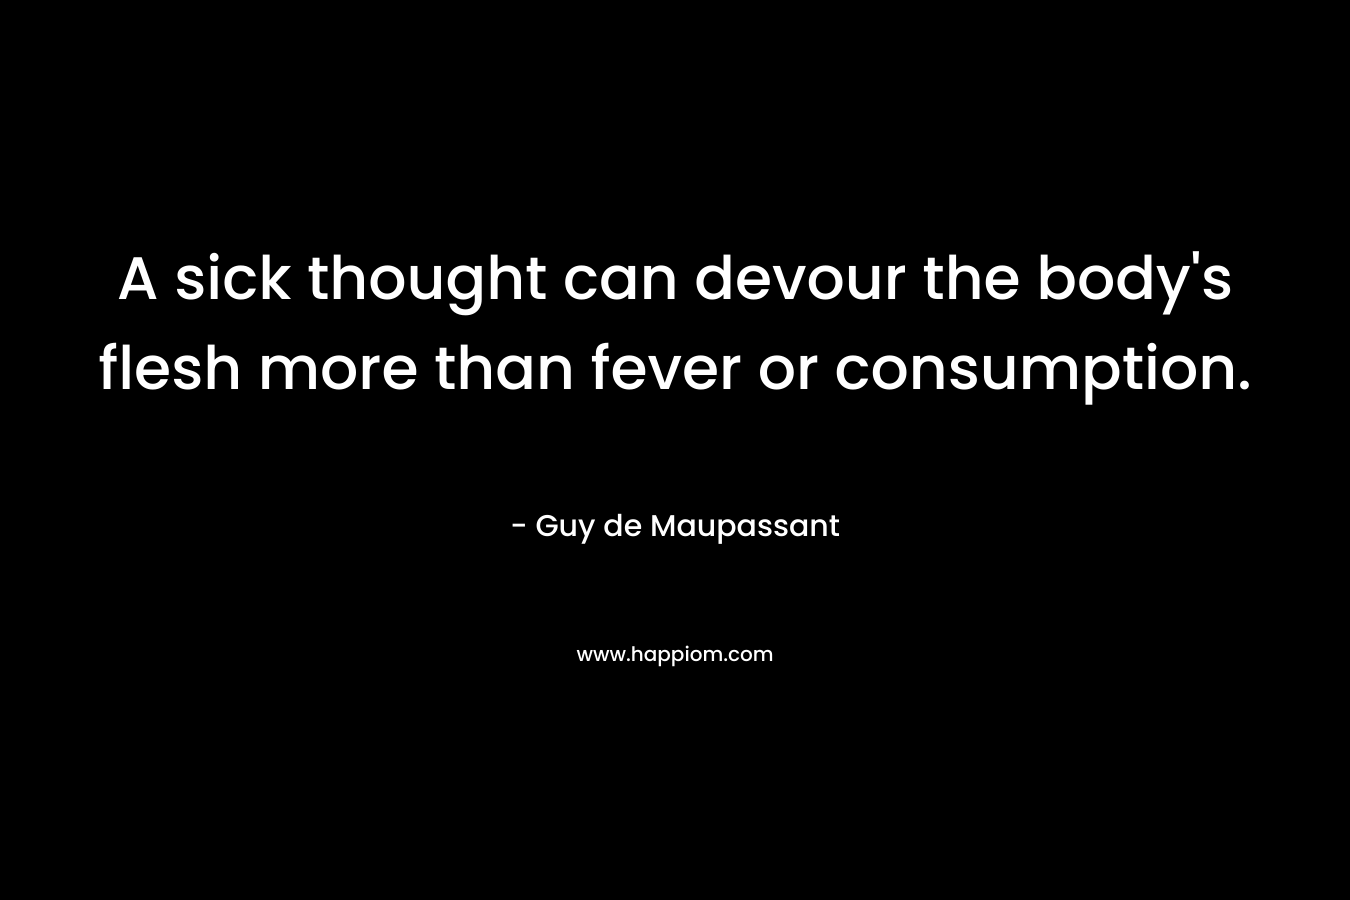 A sick thought can devour the body's flesh more than fever or consumption.